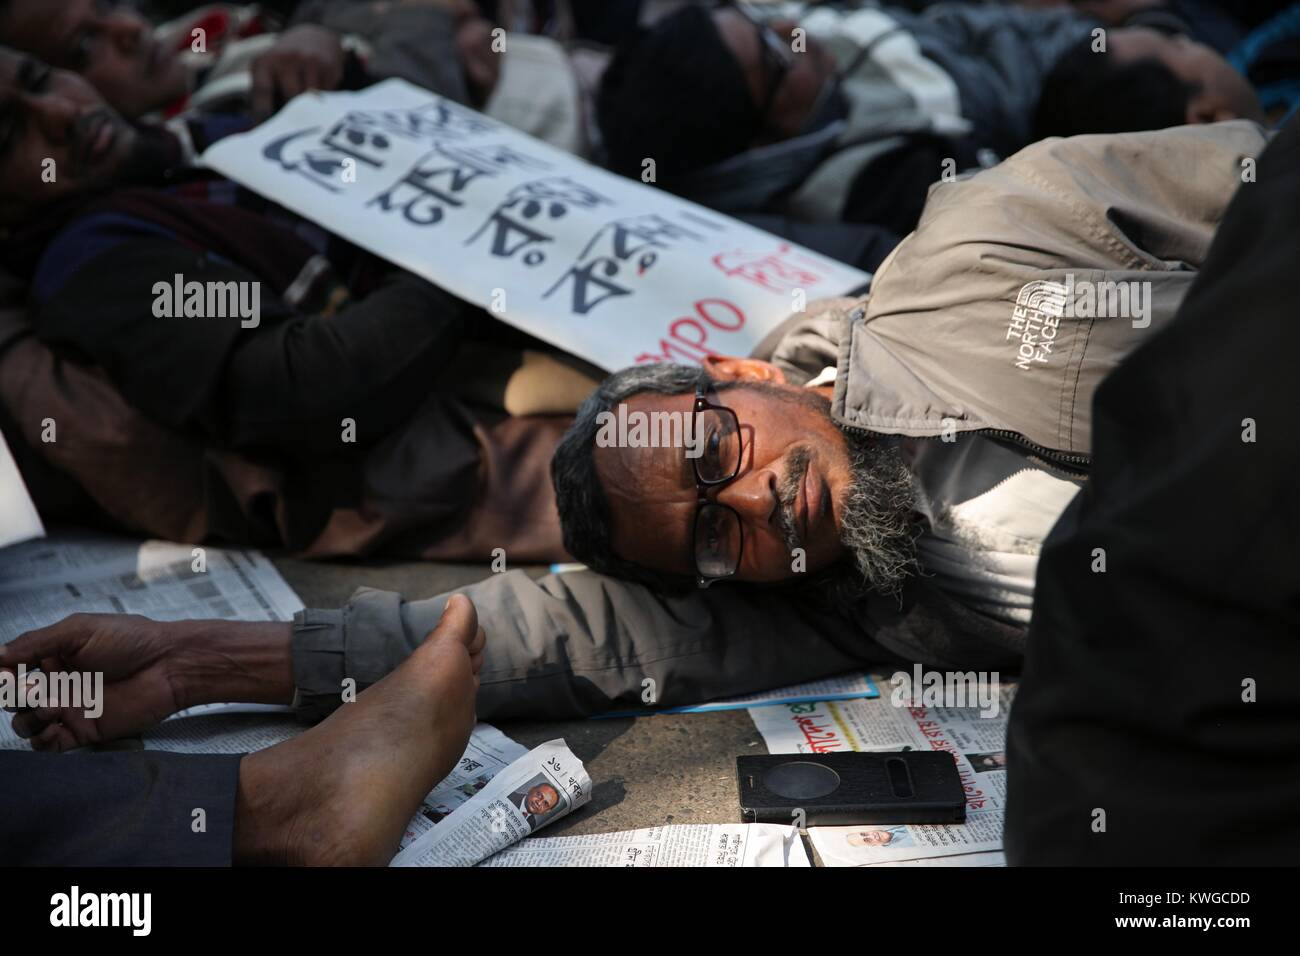 Dhaka, Bangladesh. 3rd Jan, 2018. Non-MPO (monthly pay order) teachers from different non-government institutions, lay down in the street as they continue the four day of their fast unto death hunger strike program in front of the National Press Club in Dhaka, Bangladesh, 03 January 2018. Some hundred teachers went for hunger strike demanding their inclusion of the government-approved educational MPO facilities while more than 80,000 teachers from 5,242 non-MPO institutions are working without any pay, according to the leaders. Credit: ZUMA Press, Inc./Alamy Live News Stock Photo